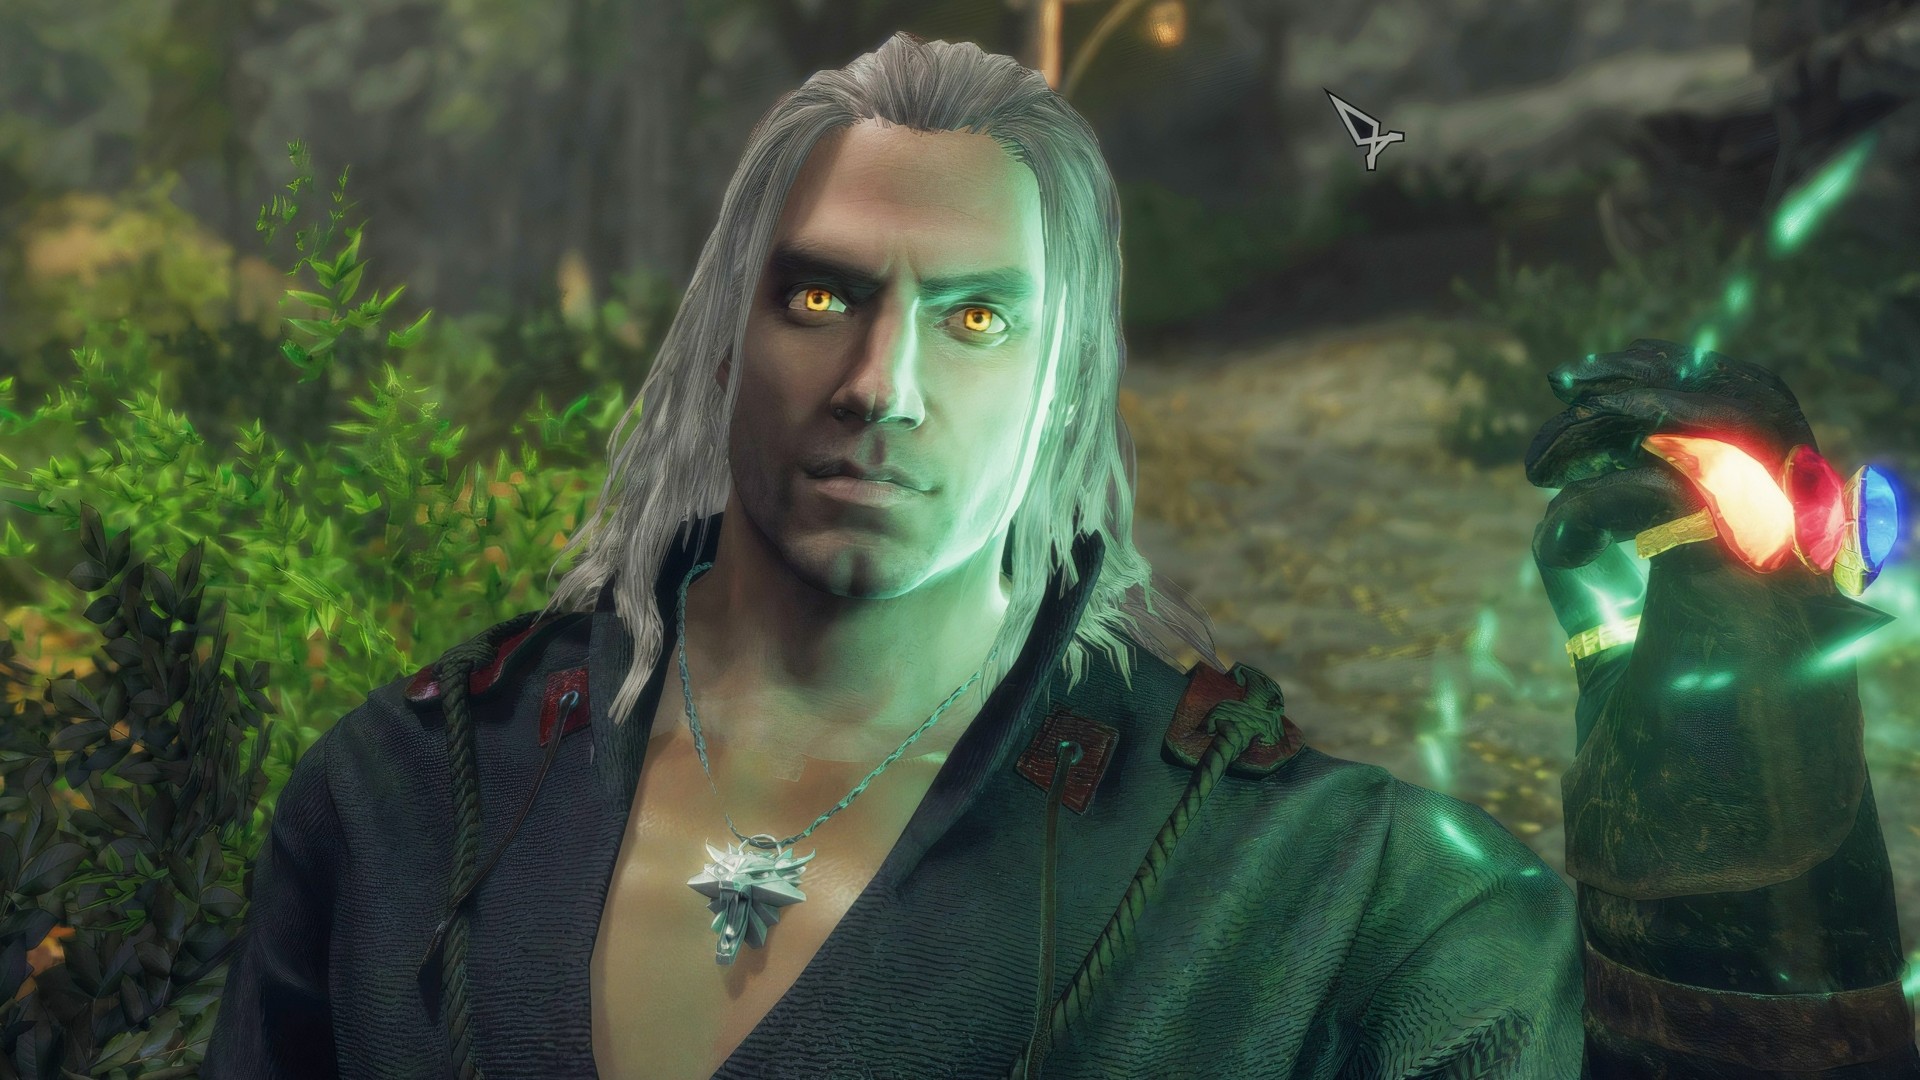 Skyrim mod lets you hunk it up as Henry Cavill from The Witcher